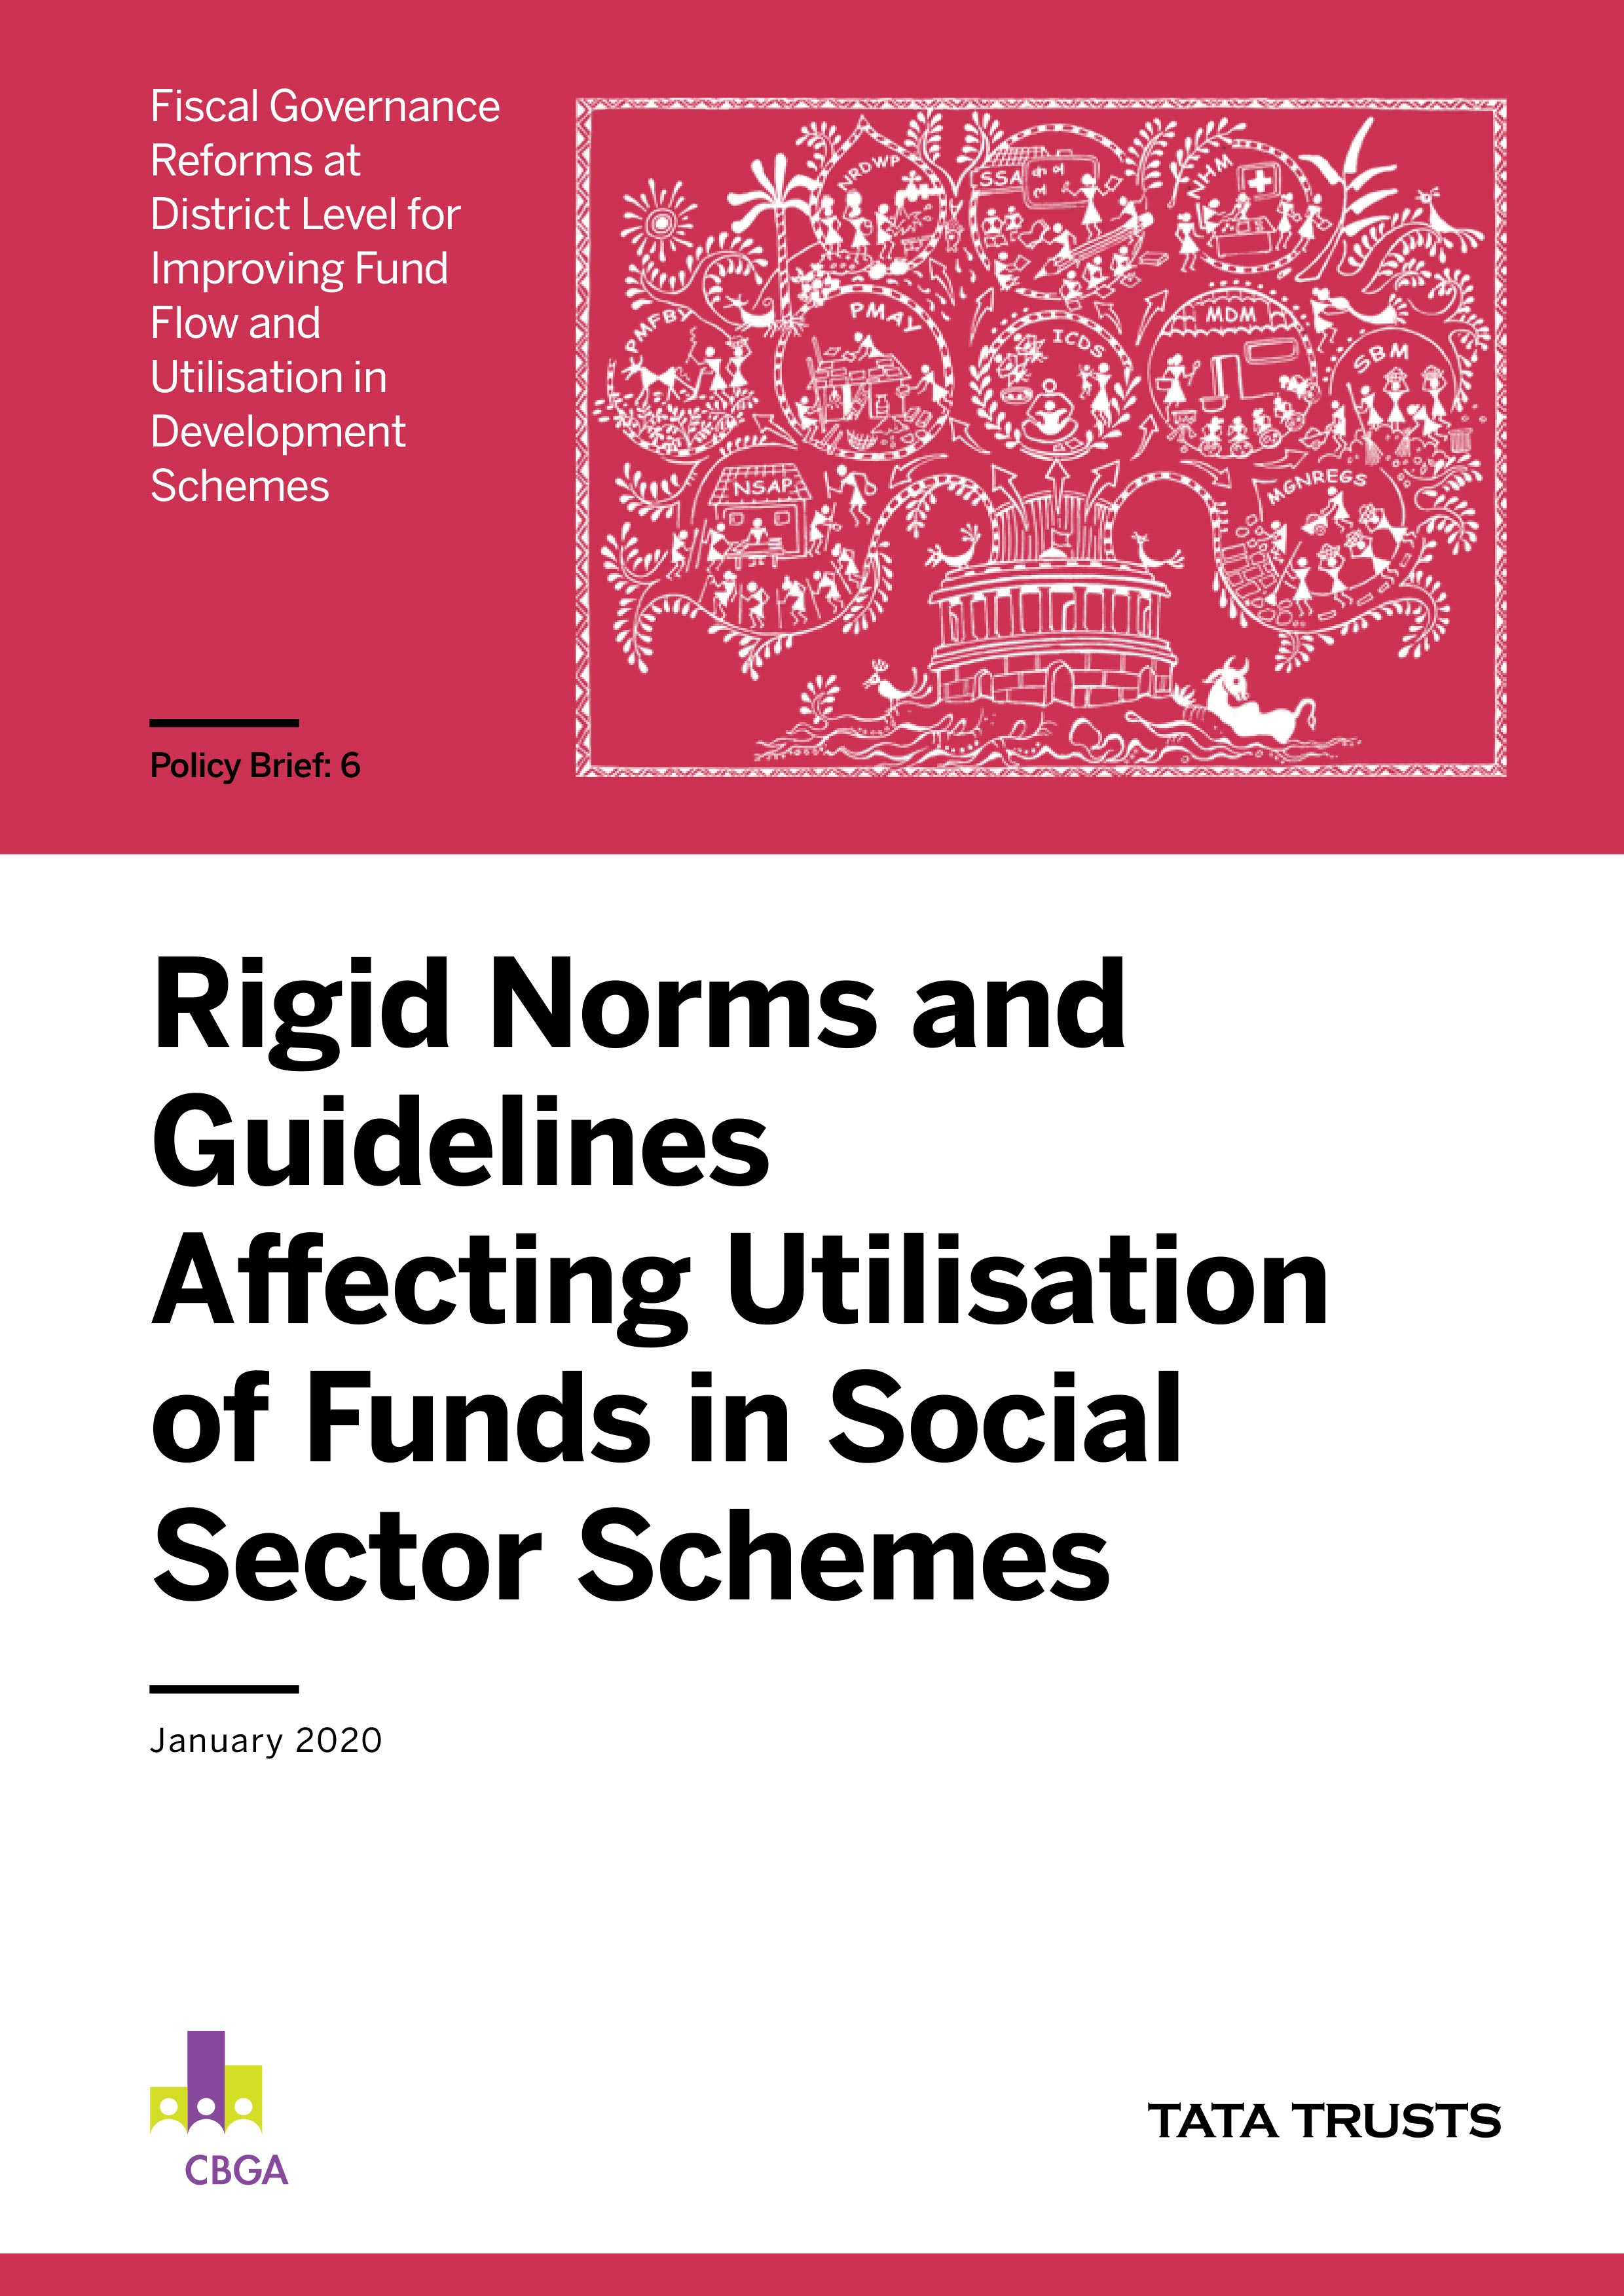 Rigid Guidelines and Unit Costs in Social Sector-Policy Brief